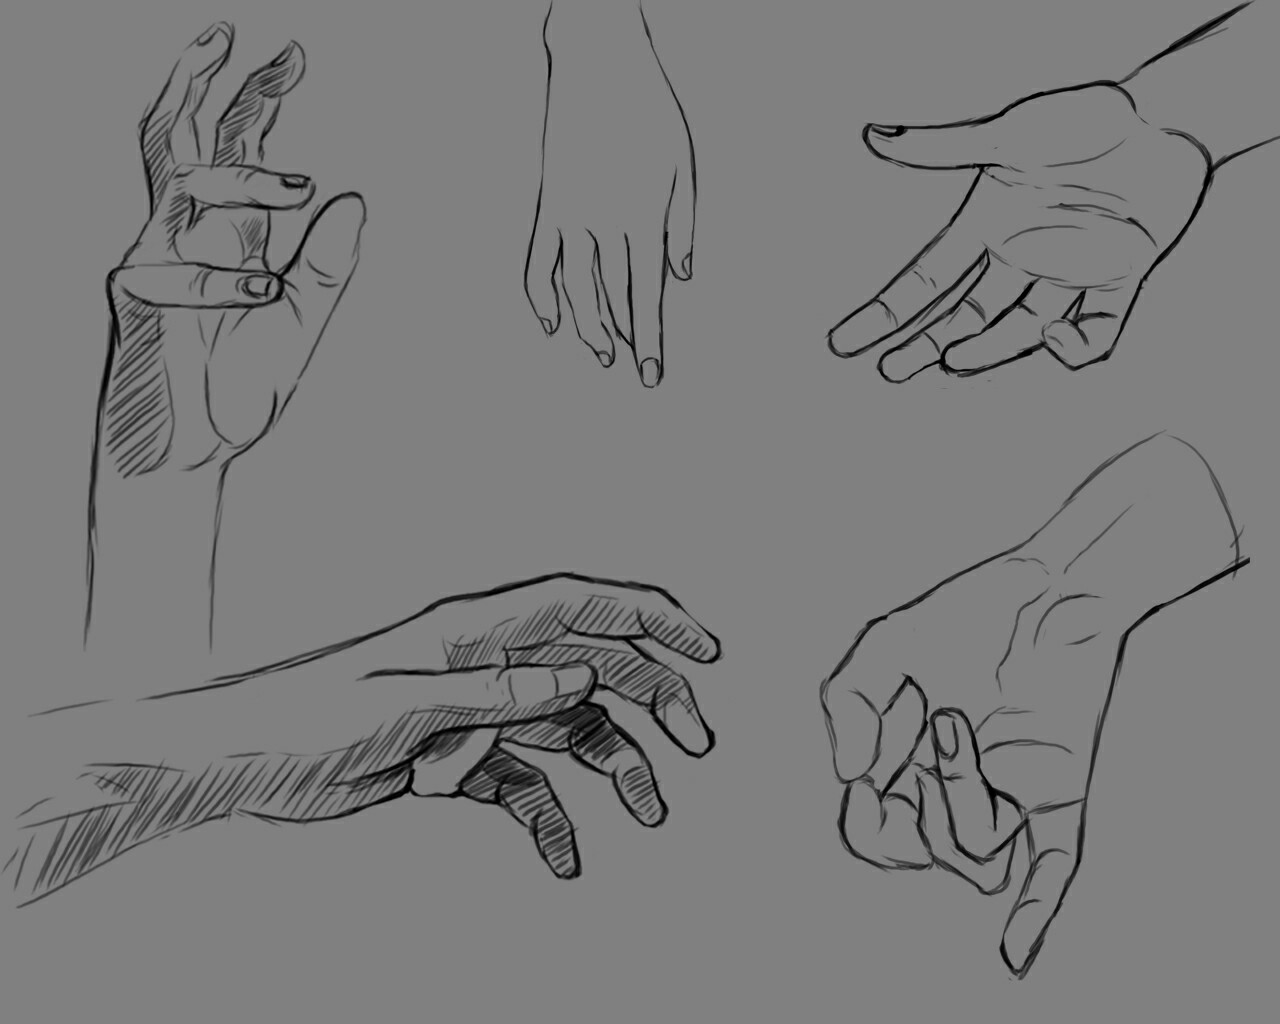 Hand Sketching 101 with 20 timed hand poses to practice - YouTube